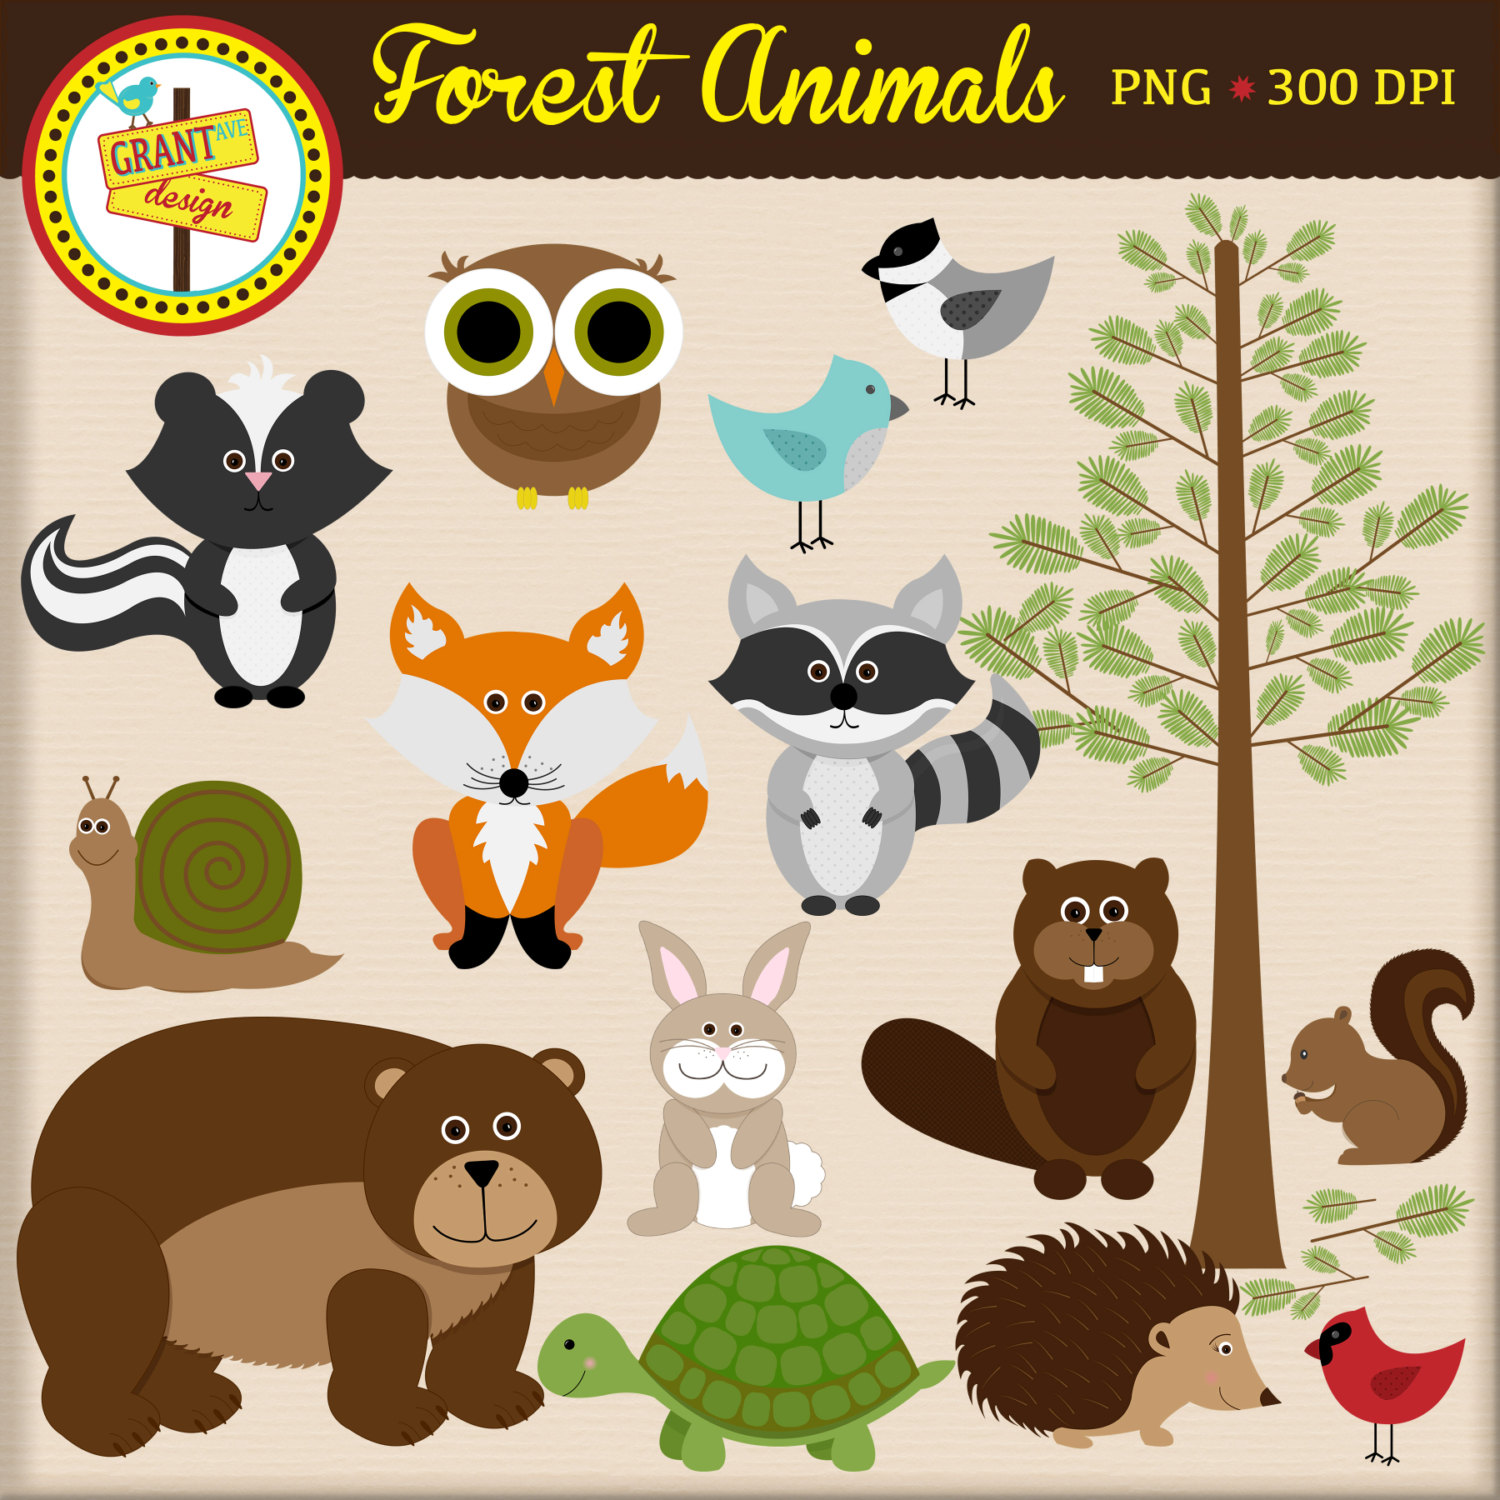 Forest Animals Clipart Woodland Animals Clip By Grantavenuedesign